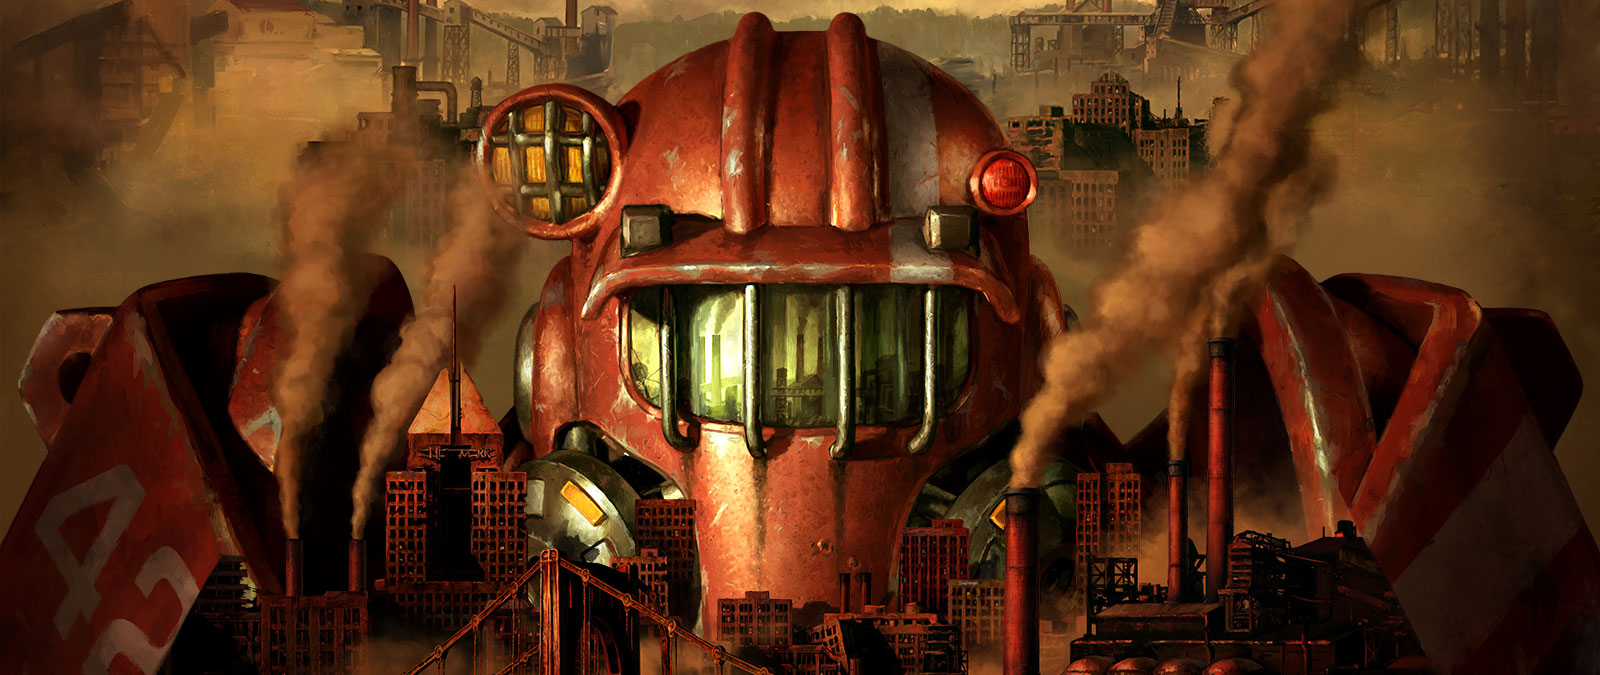 A figure in Power Armor looms large over the pollution filled skyline of the Pitt.